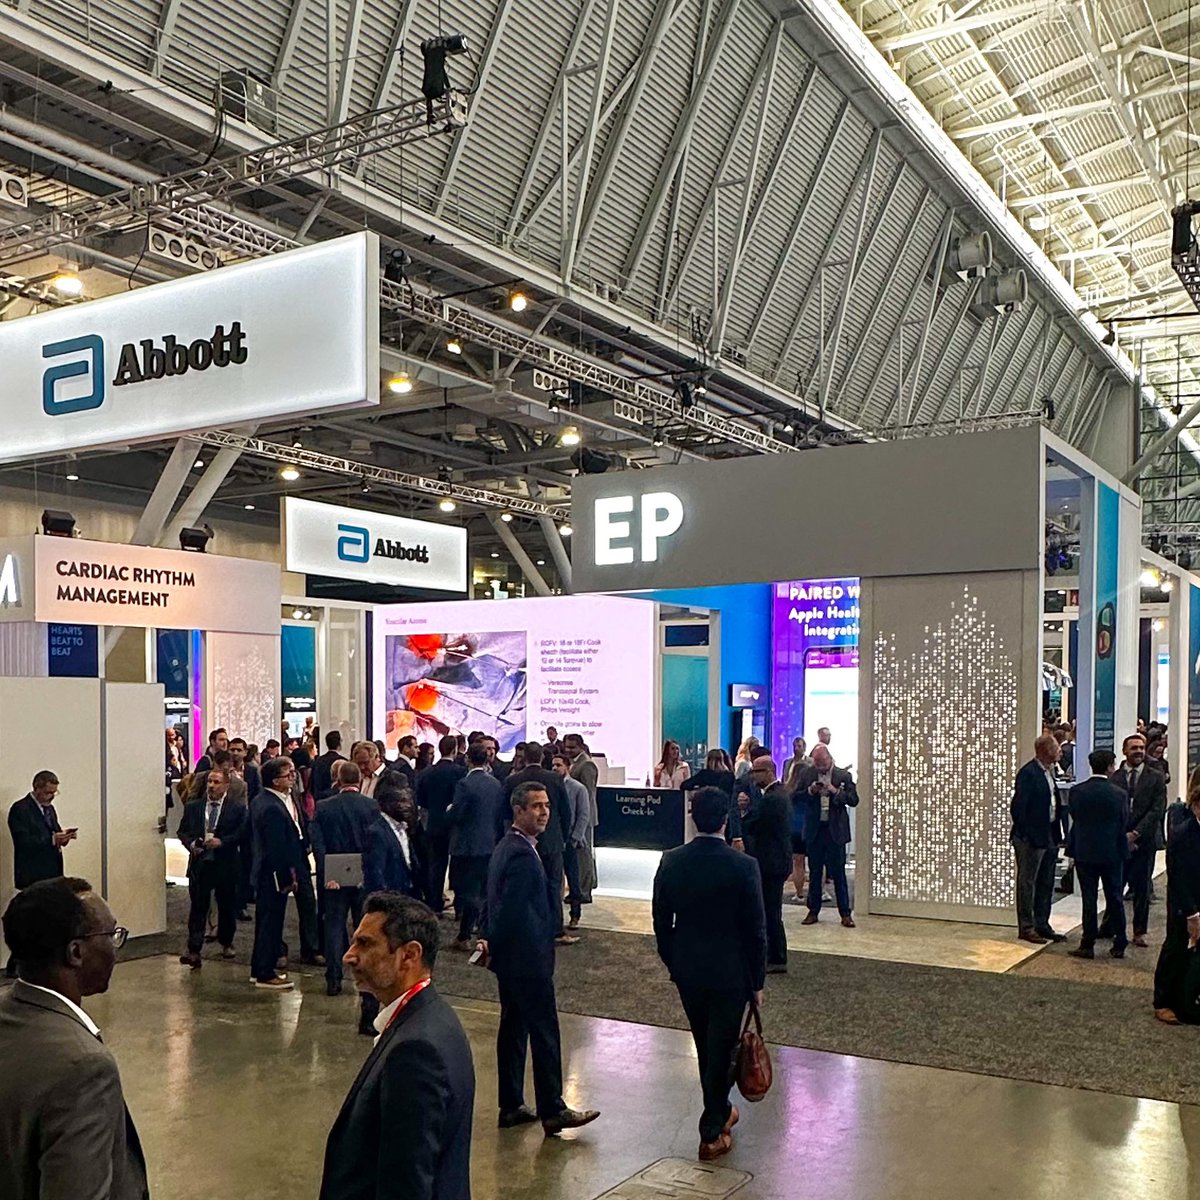 More Meet the Experts sessions coming up this afternoon at #HRS2024! Connect with @TimothyMaherMD1, @Prof_Schilling and @j_colley_md in the @AbbottCardio booth. Check the schedule: electrophysiology.abbott.com/Mapping-and-Ab… #AbbottProud #EPatHRS